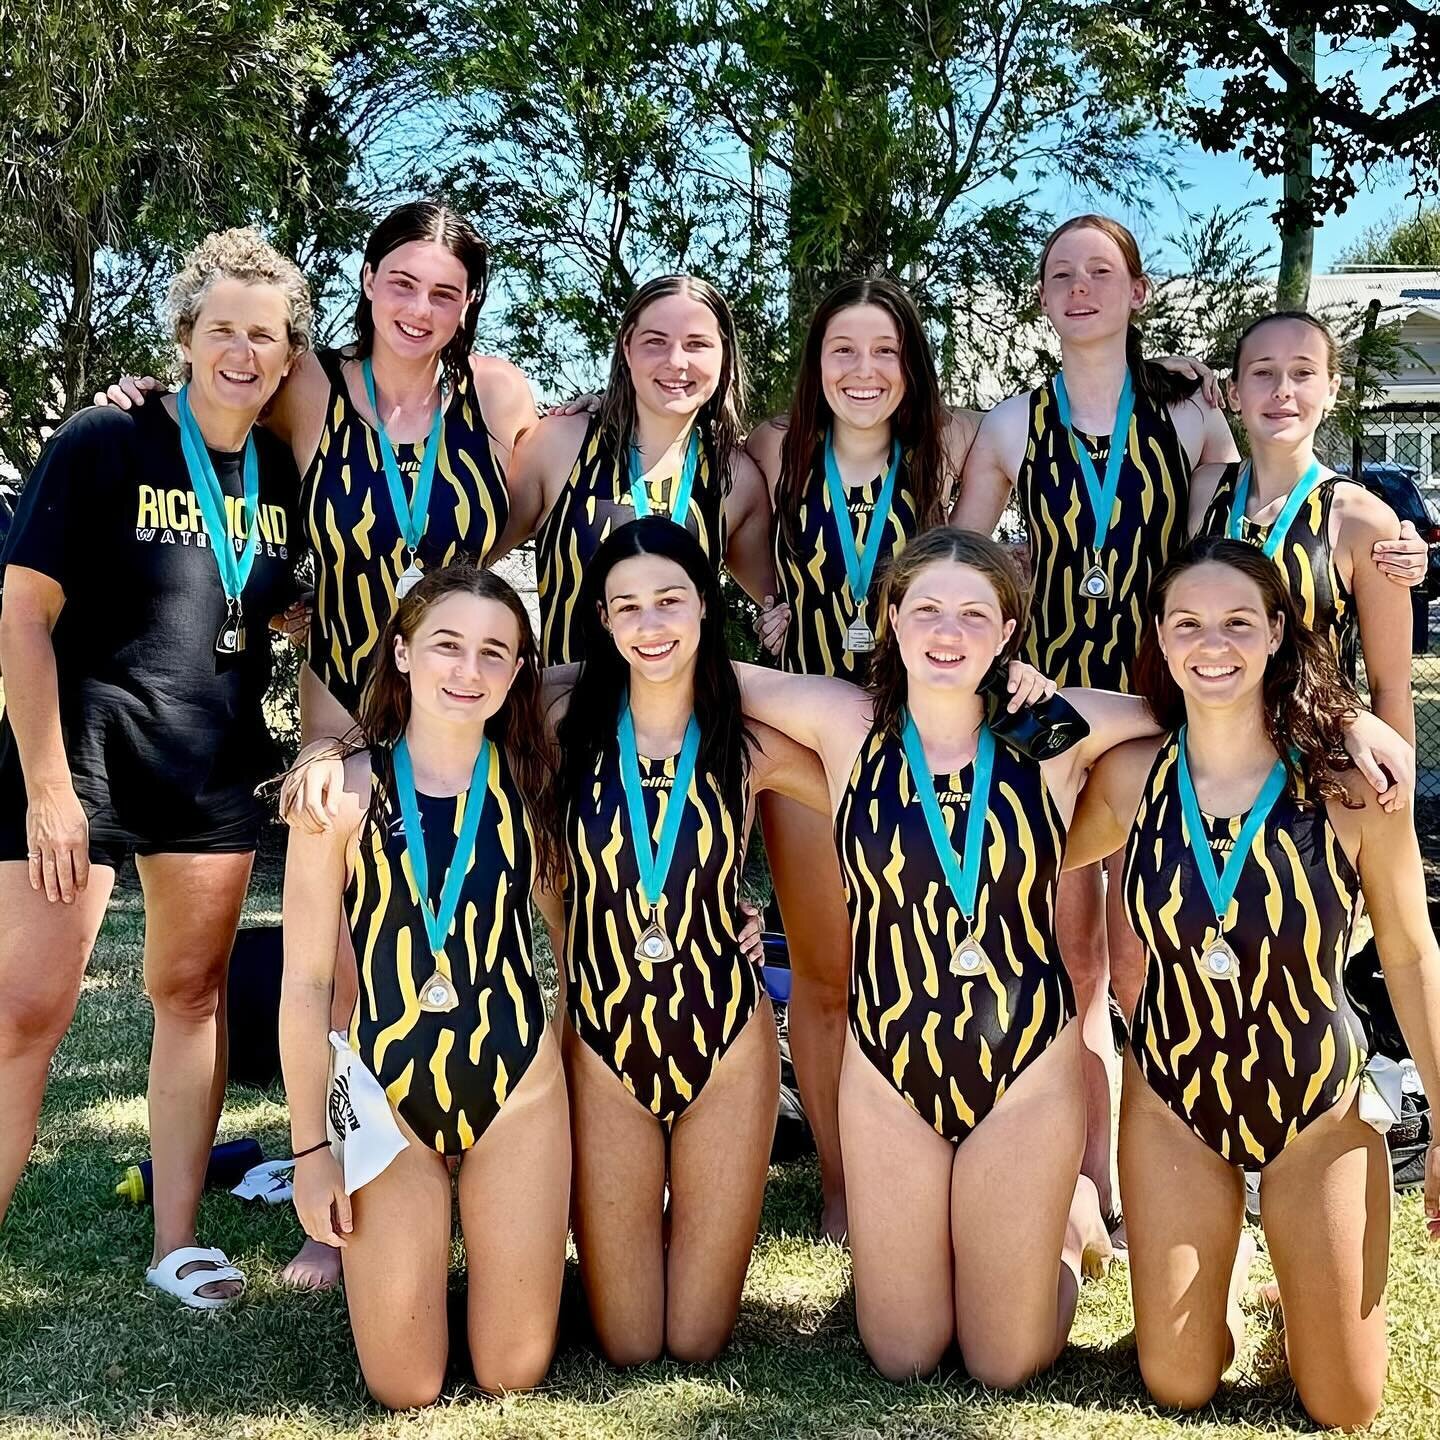 The Tristate tournament is over for another year and we loved it. All of our players had a fantastic weekend, bonding with teammates, making new friends and playing lots of Water Polo.

This was our most successful tournament ever. The preparation an